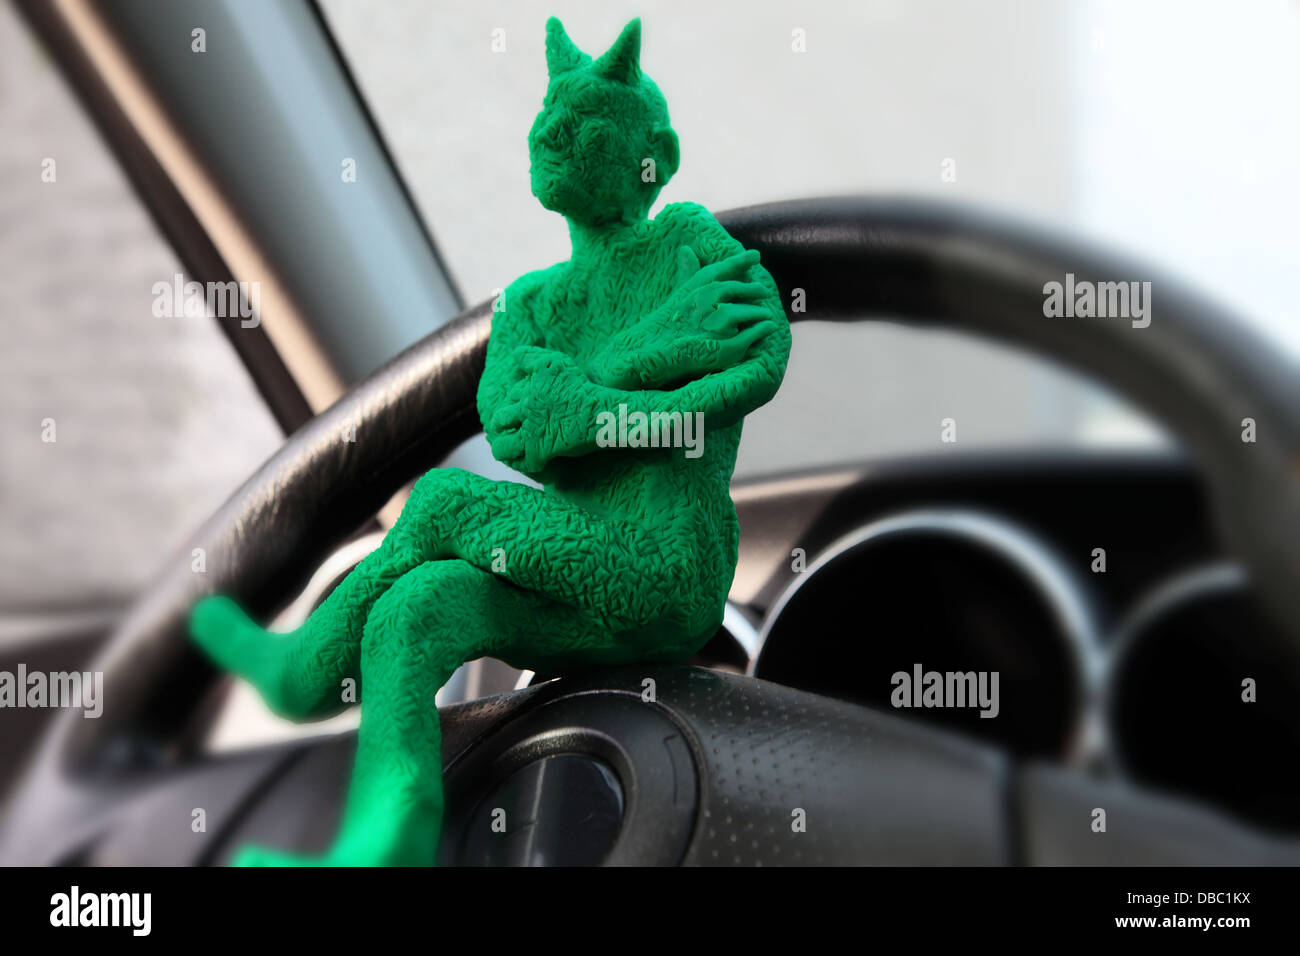 a little green devil made of clay, sits on the steering wheel of a car...he is waiting for someone to grab the wheel. Stock Photo